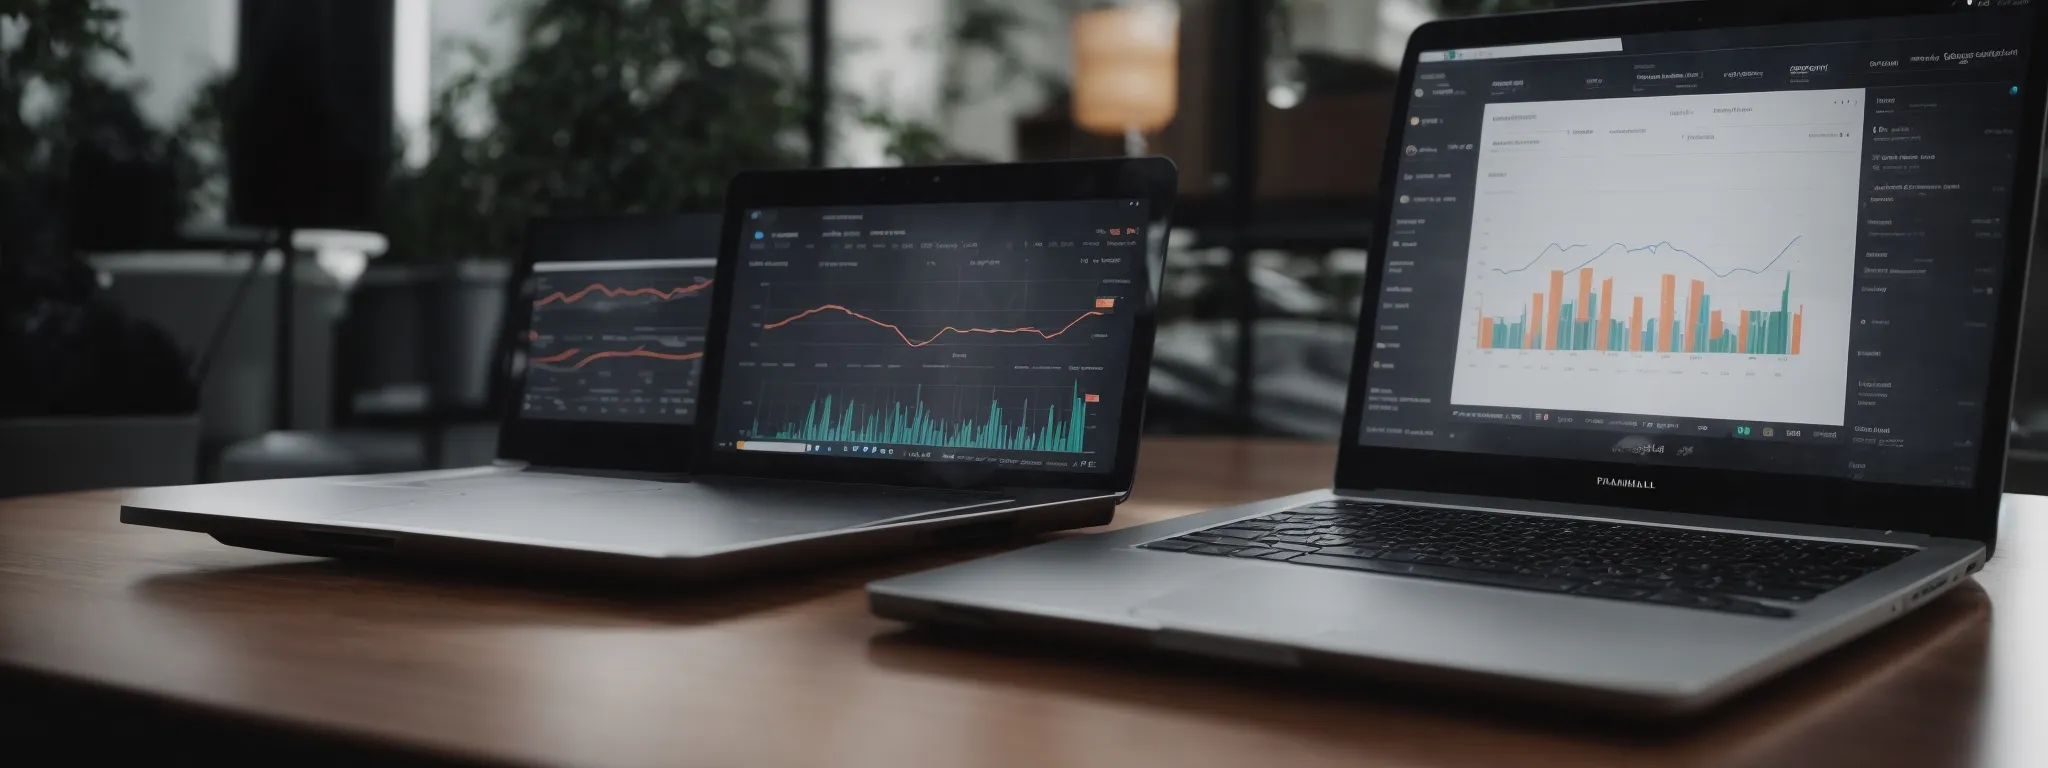 a laptop displaying complex graphs and charts reflecting user interaction and website analytics.